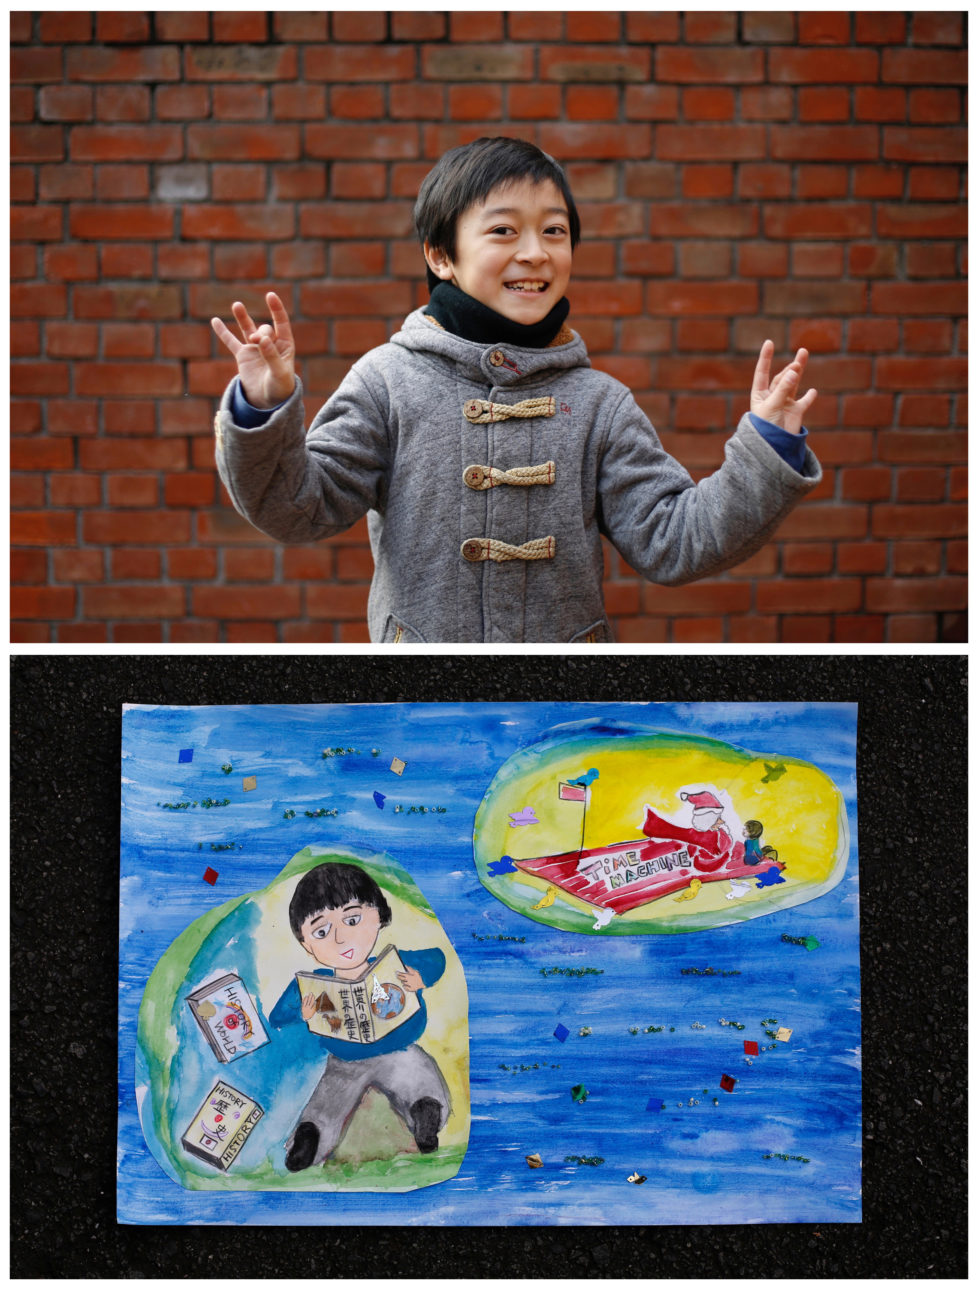 A combination picture shows Natsuki Ariga, 9, posing for a photograph at a library (top) and his drawing of what he wants to get for Christmas from Santa, in Tokyo, Japan December 1, 2016. Natsuki wants to get comic books on Japanese and world history. "Santa gives me a present every year for working hard. That's why I practice Electone (Yamaha's electronic organ), abacus and track and field very hard, " he said. Reuters photographers around the world asked children to draw what they wanted to receive from Santa for Christmas. REUTERS/Toru Hanai SEARCH "CHRISTMAS WISHES" FOR THIS STORY. SEARCH "WIDER IMAGE" FOR ALL STORIES. - RTSV35U